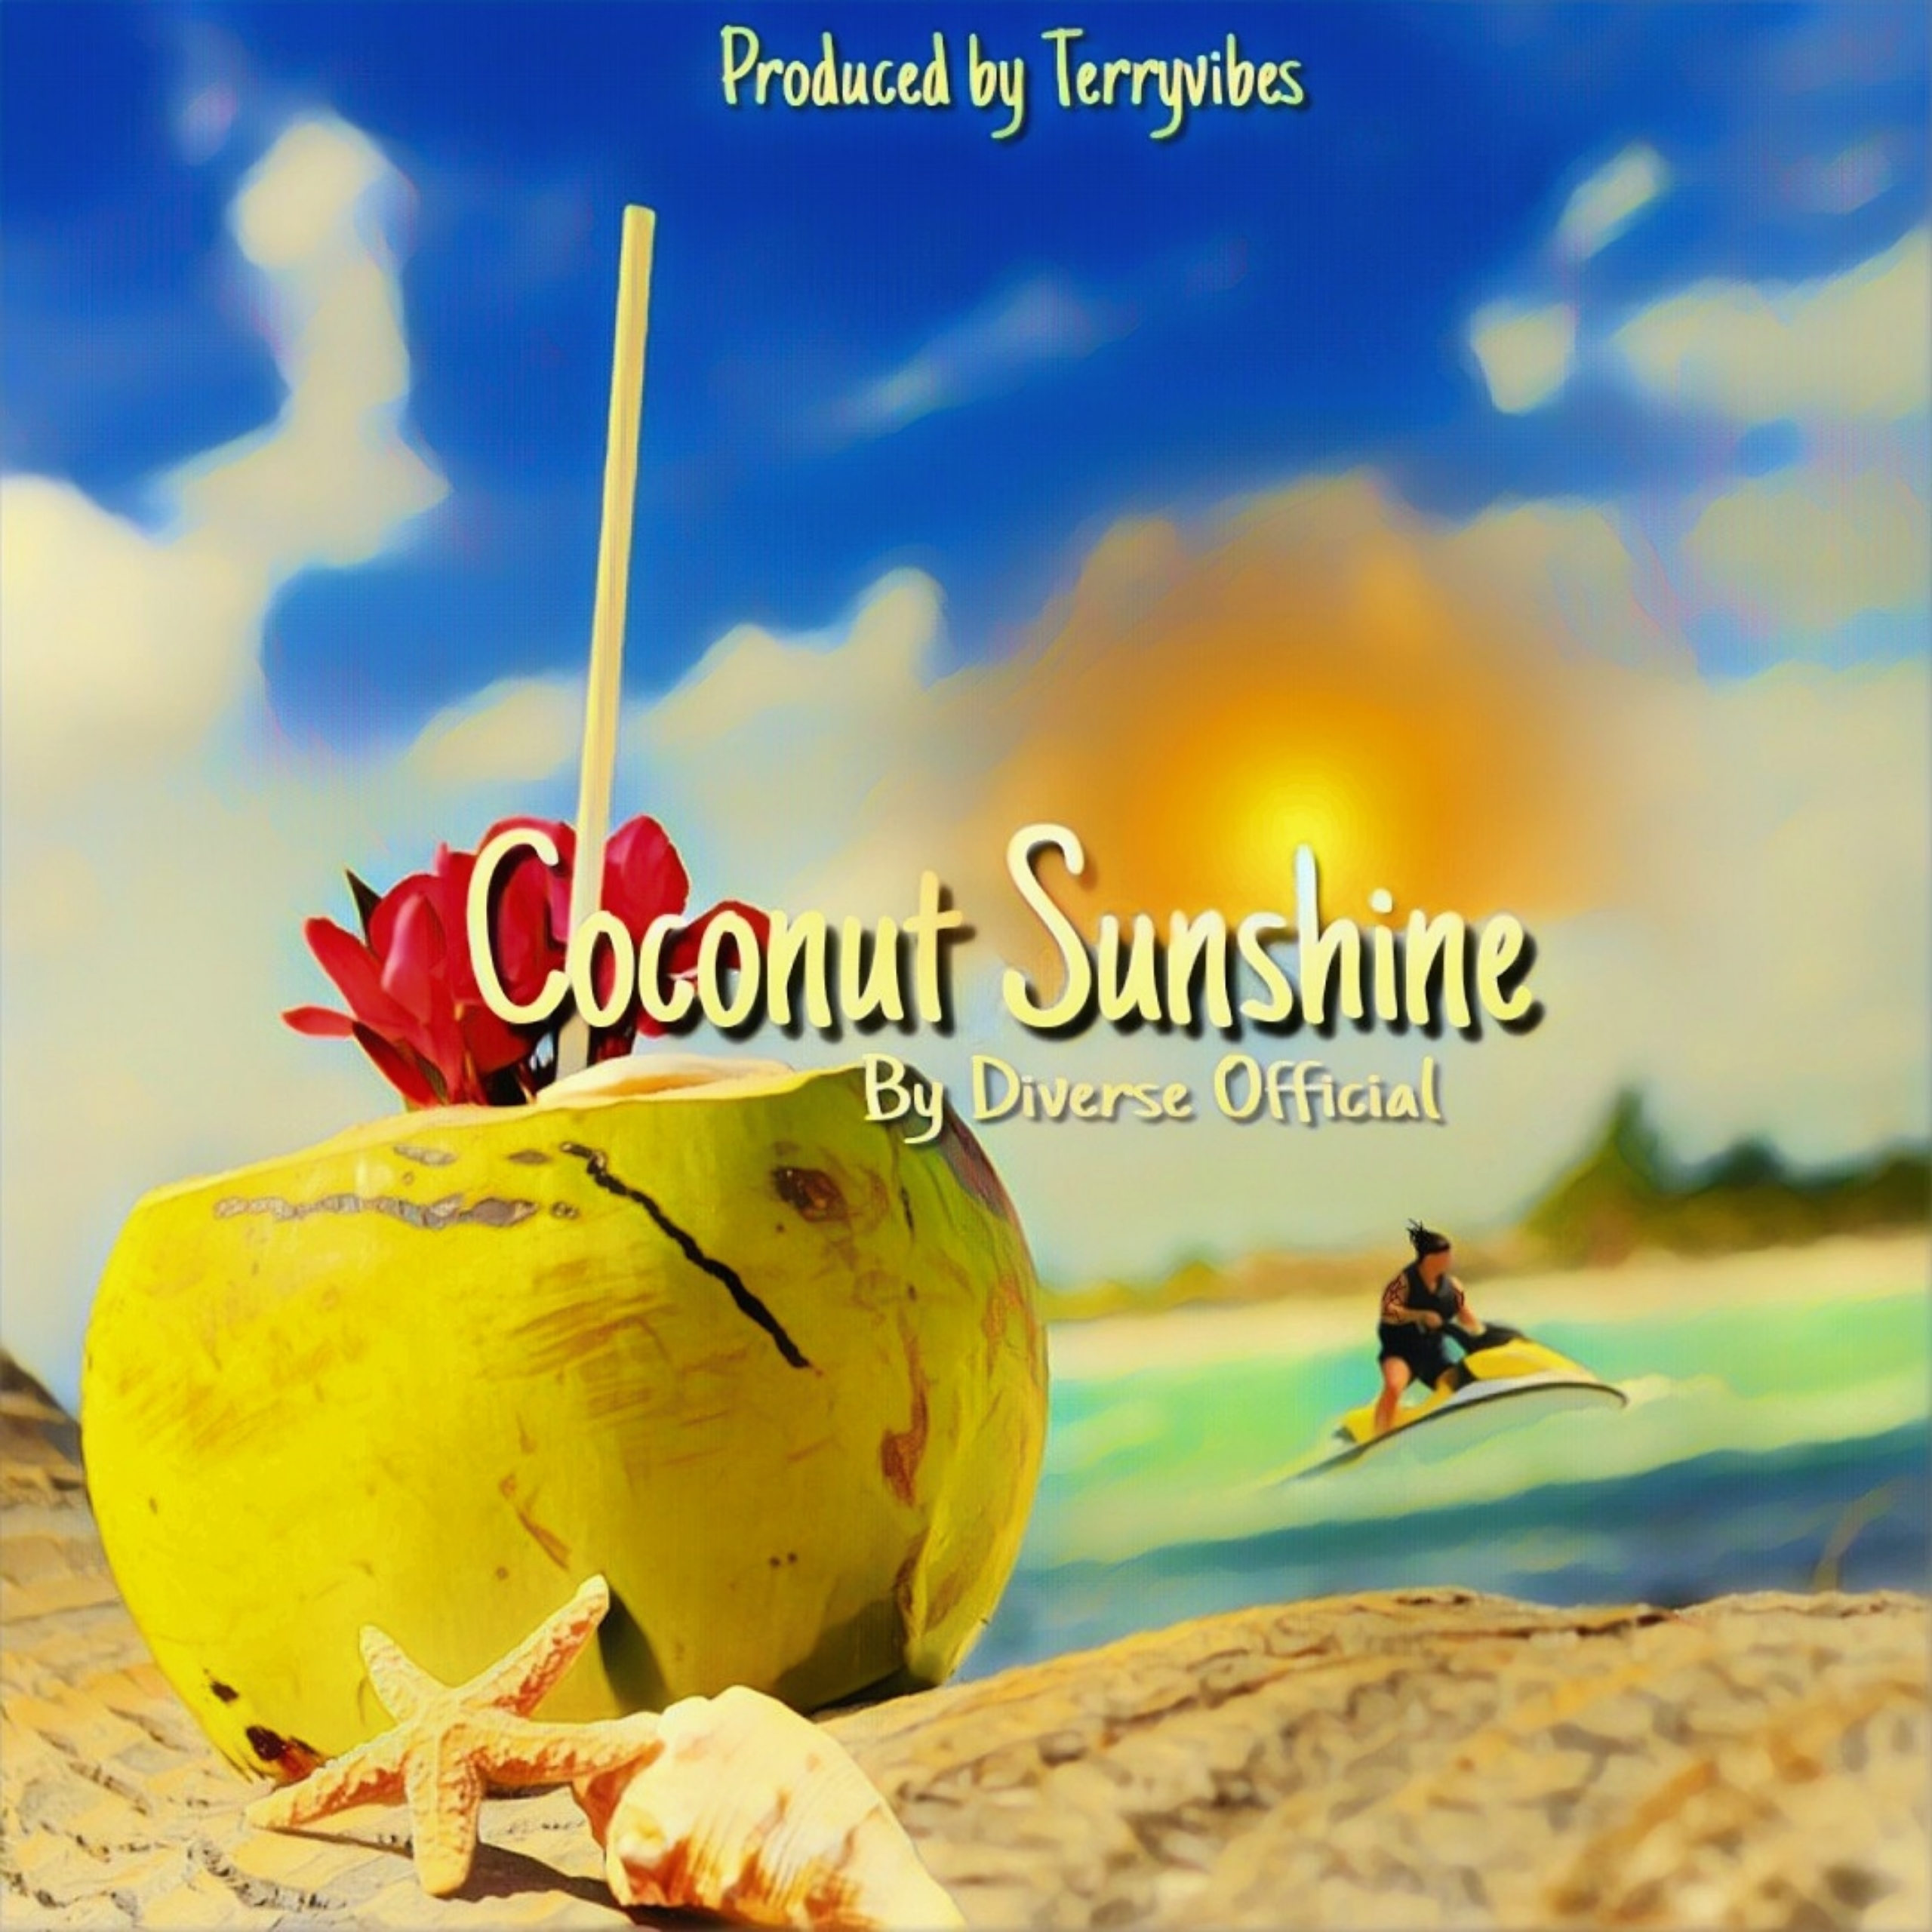 Art for Coconut Sunshine by Diverse Official by Diverse Official